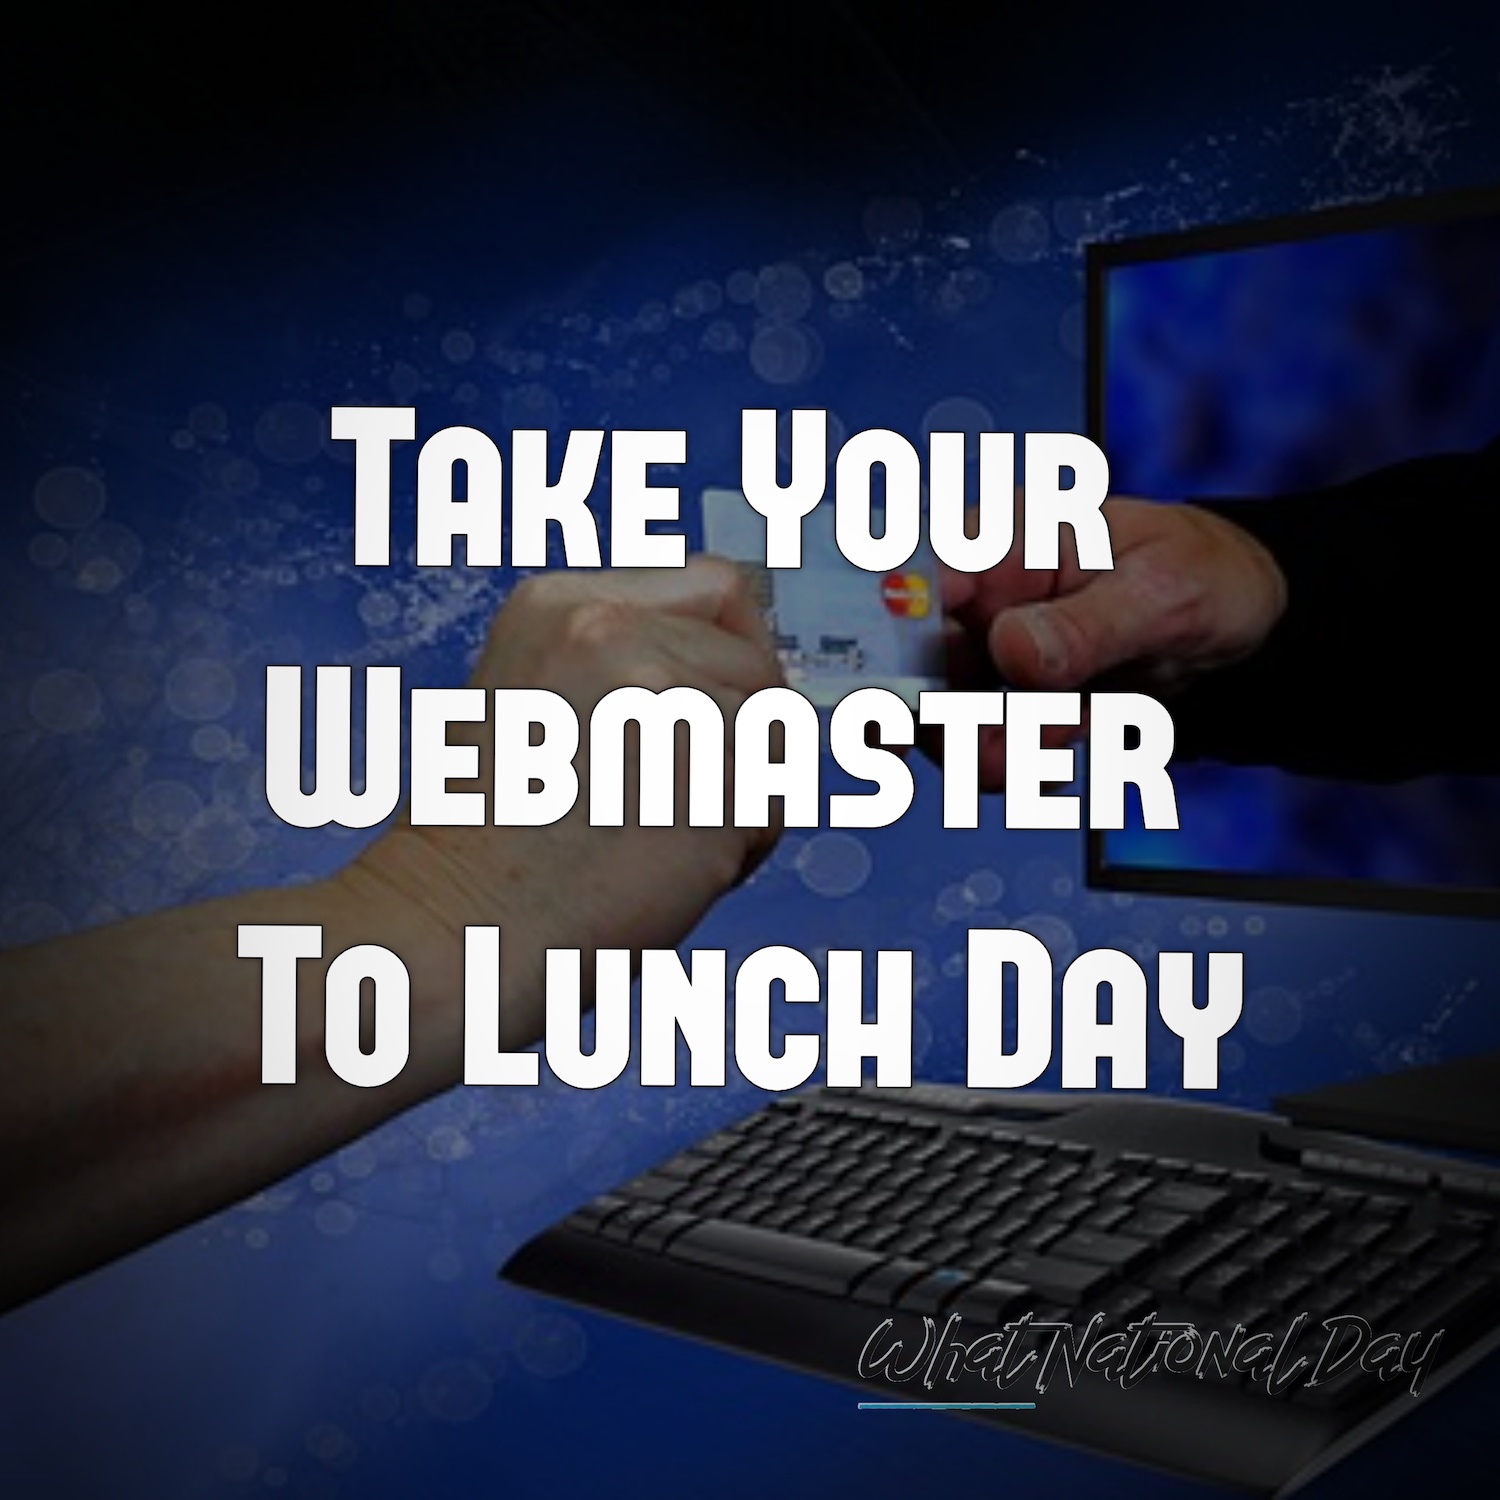 Take Your Webmaster To Lunch Day